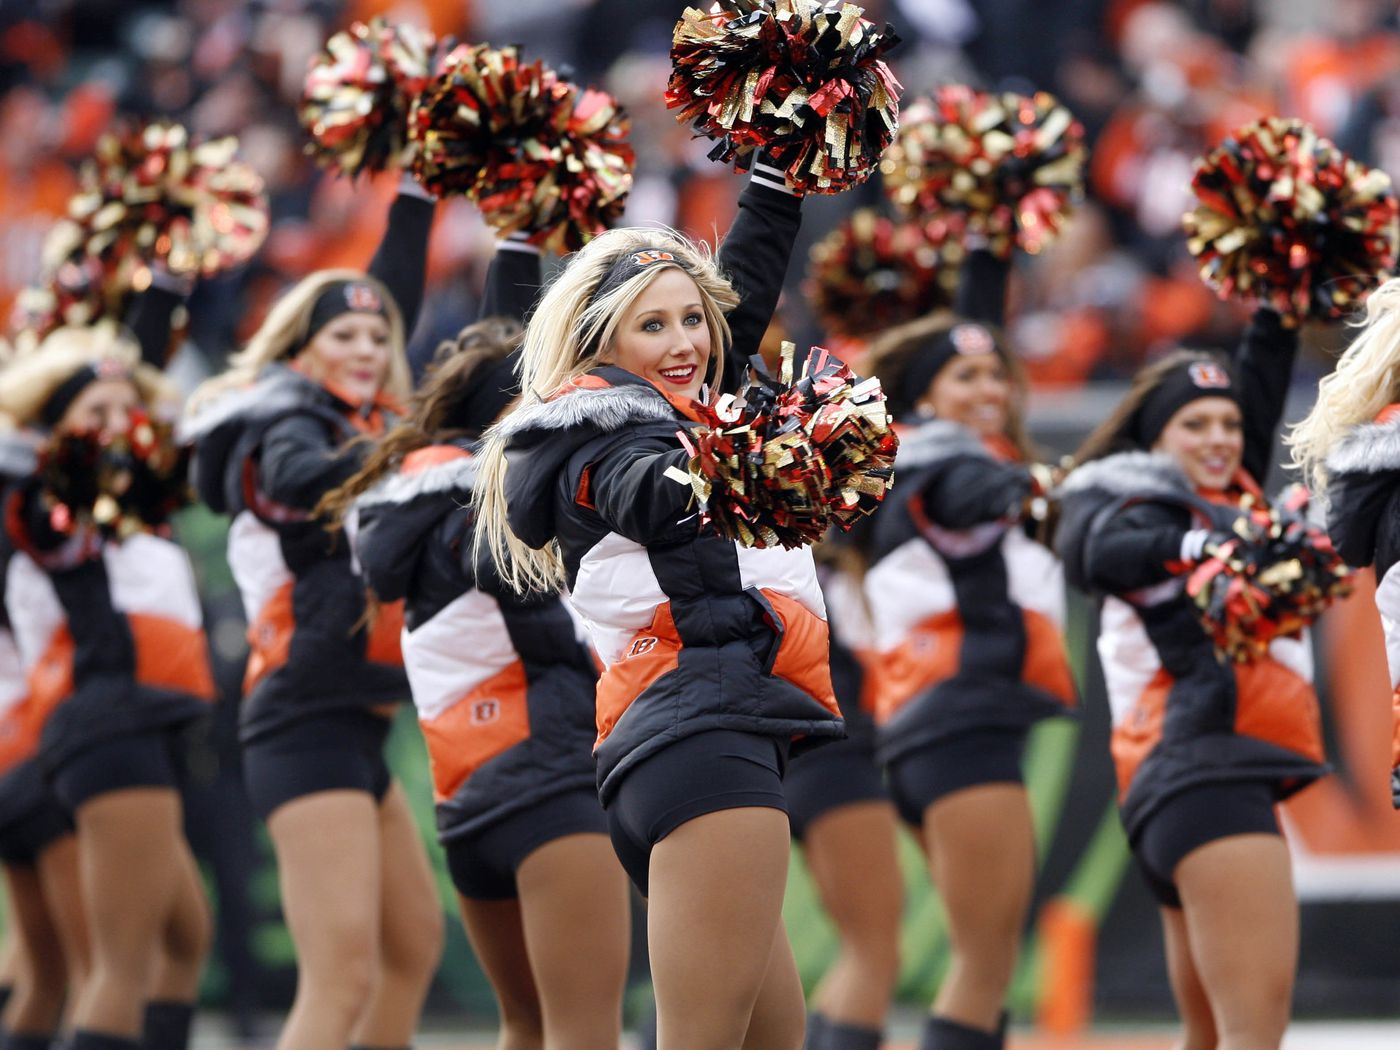 charles pulliam recommends cheerleaders with no panties pic